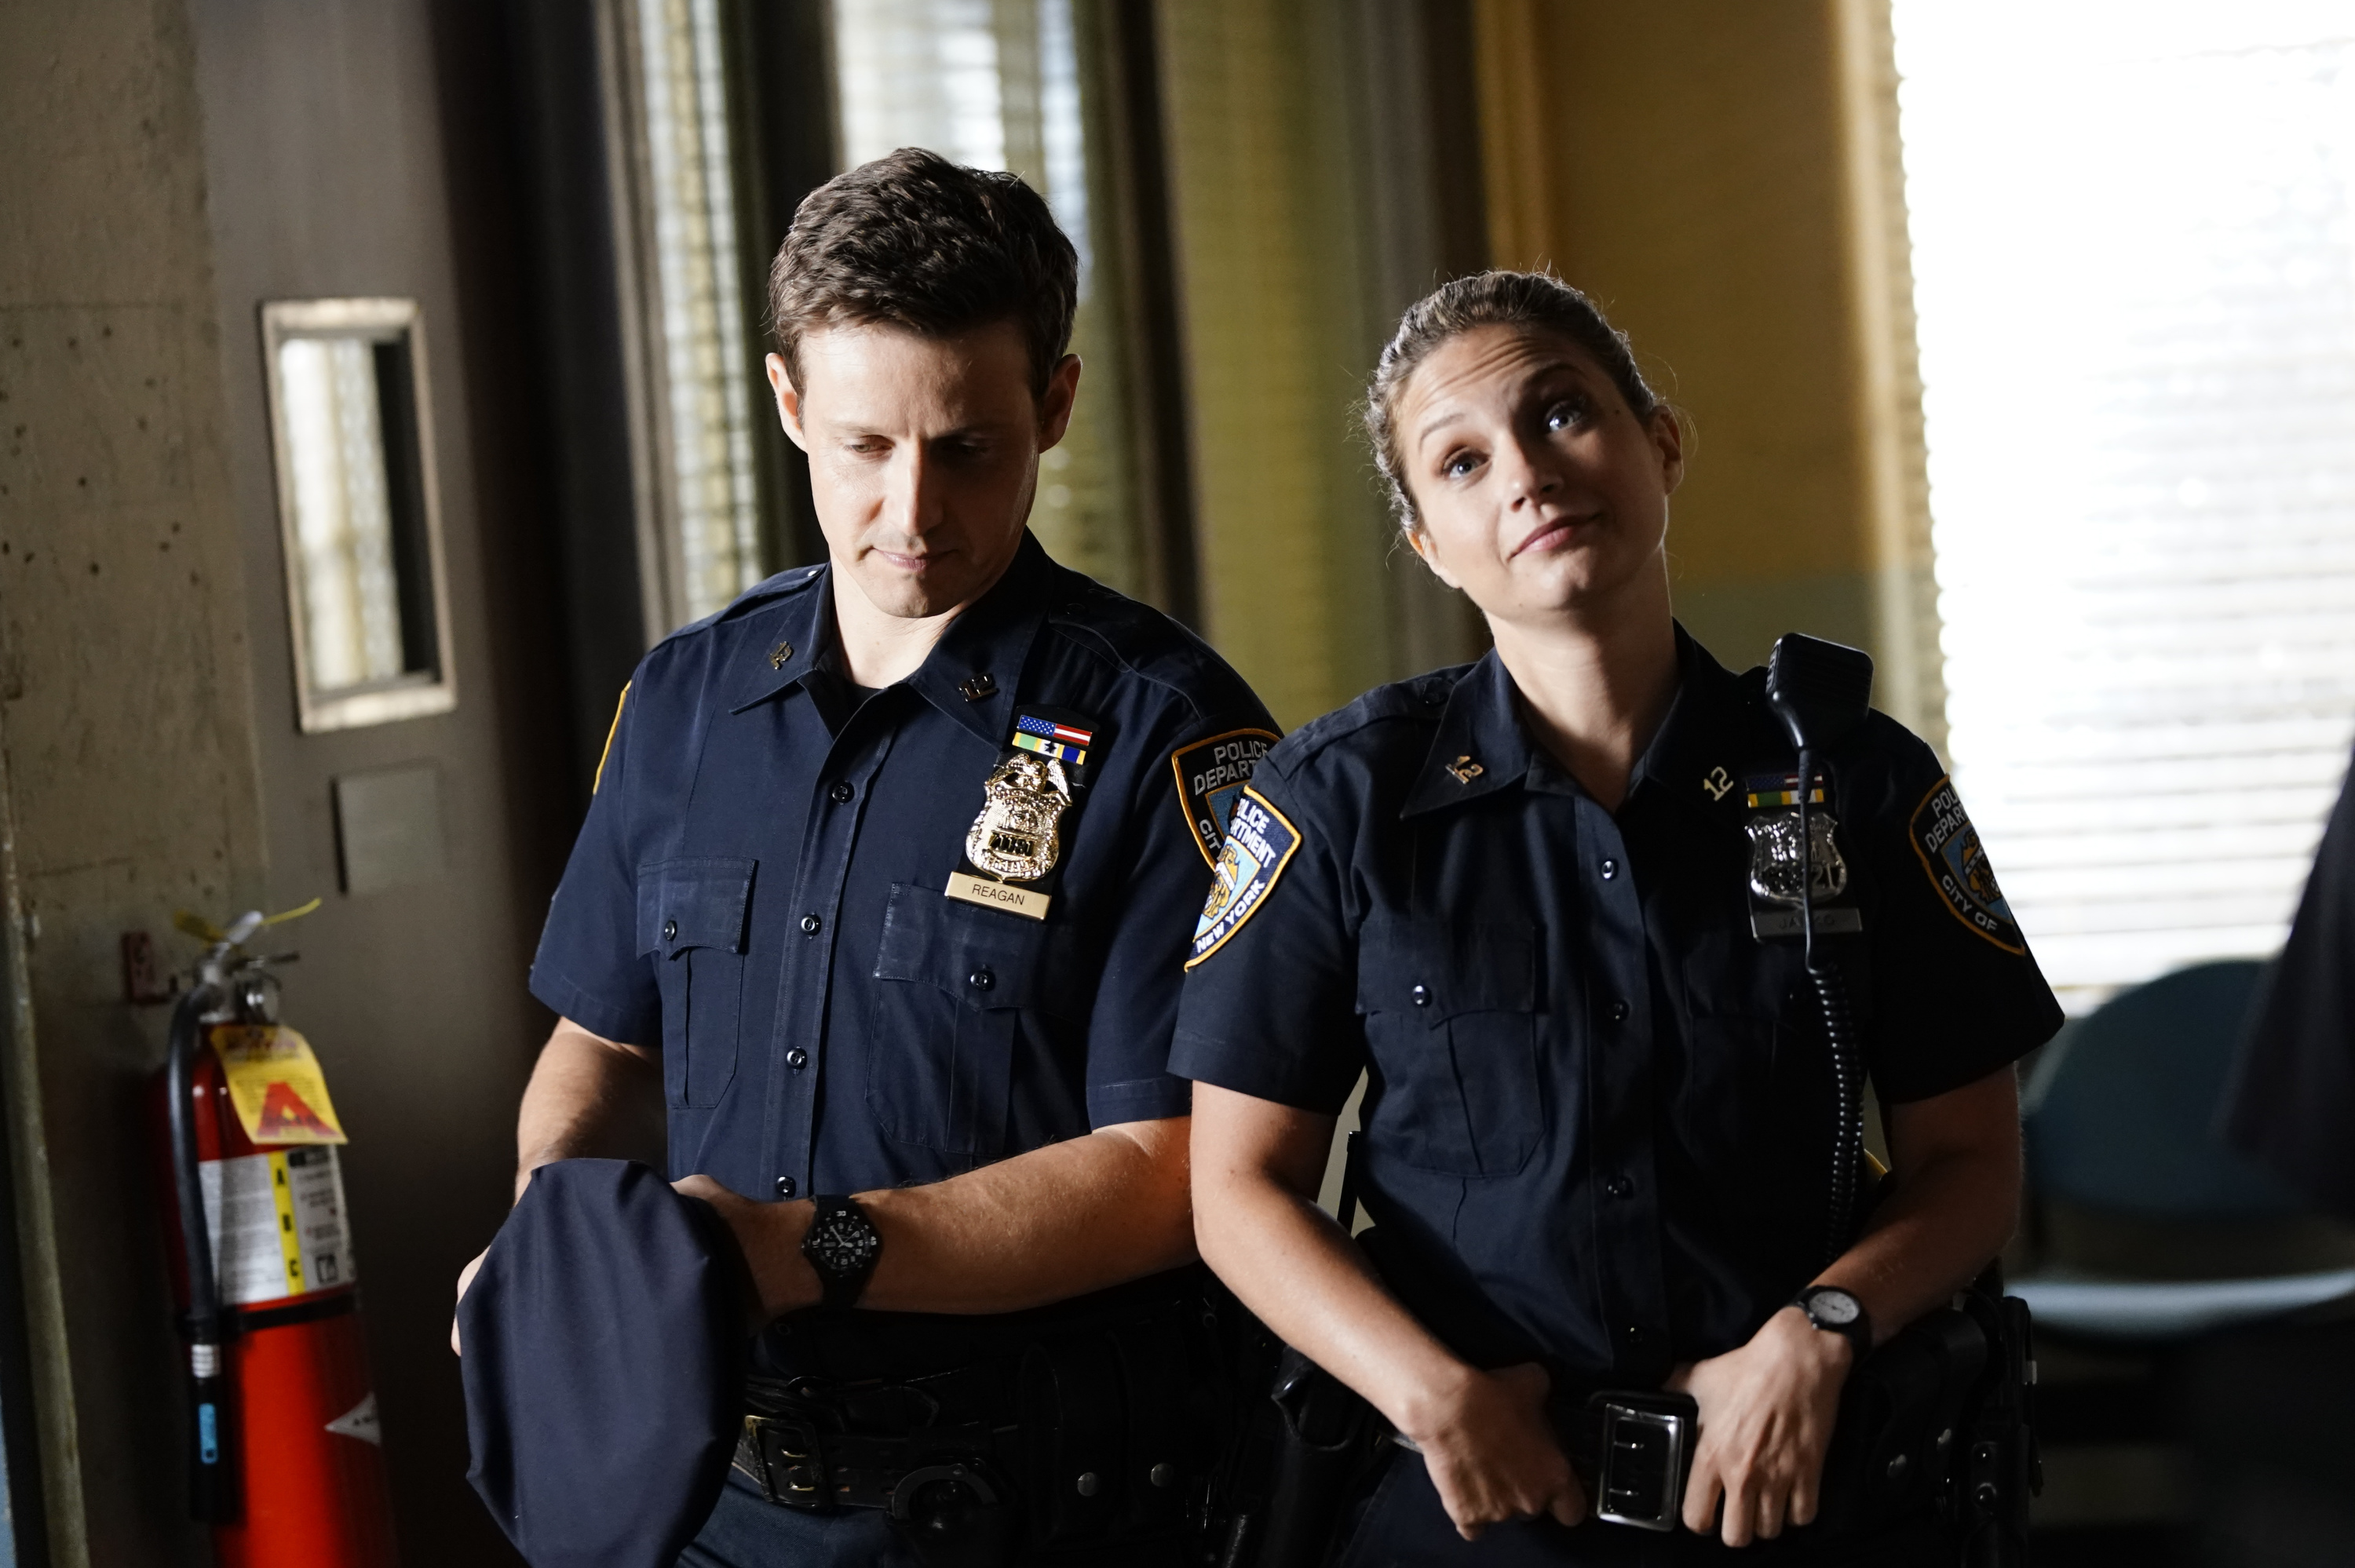 'Blue Bloods' is in the midst of its ninth season